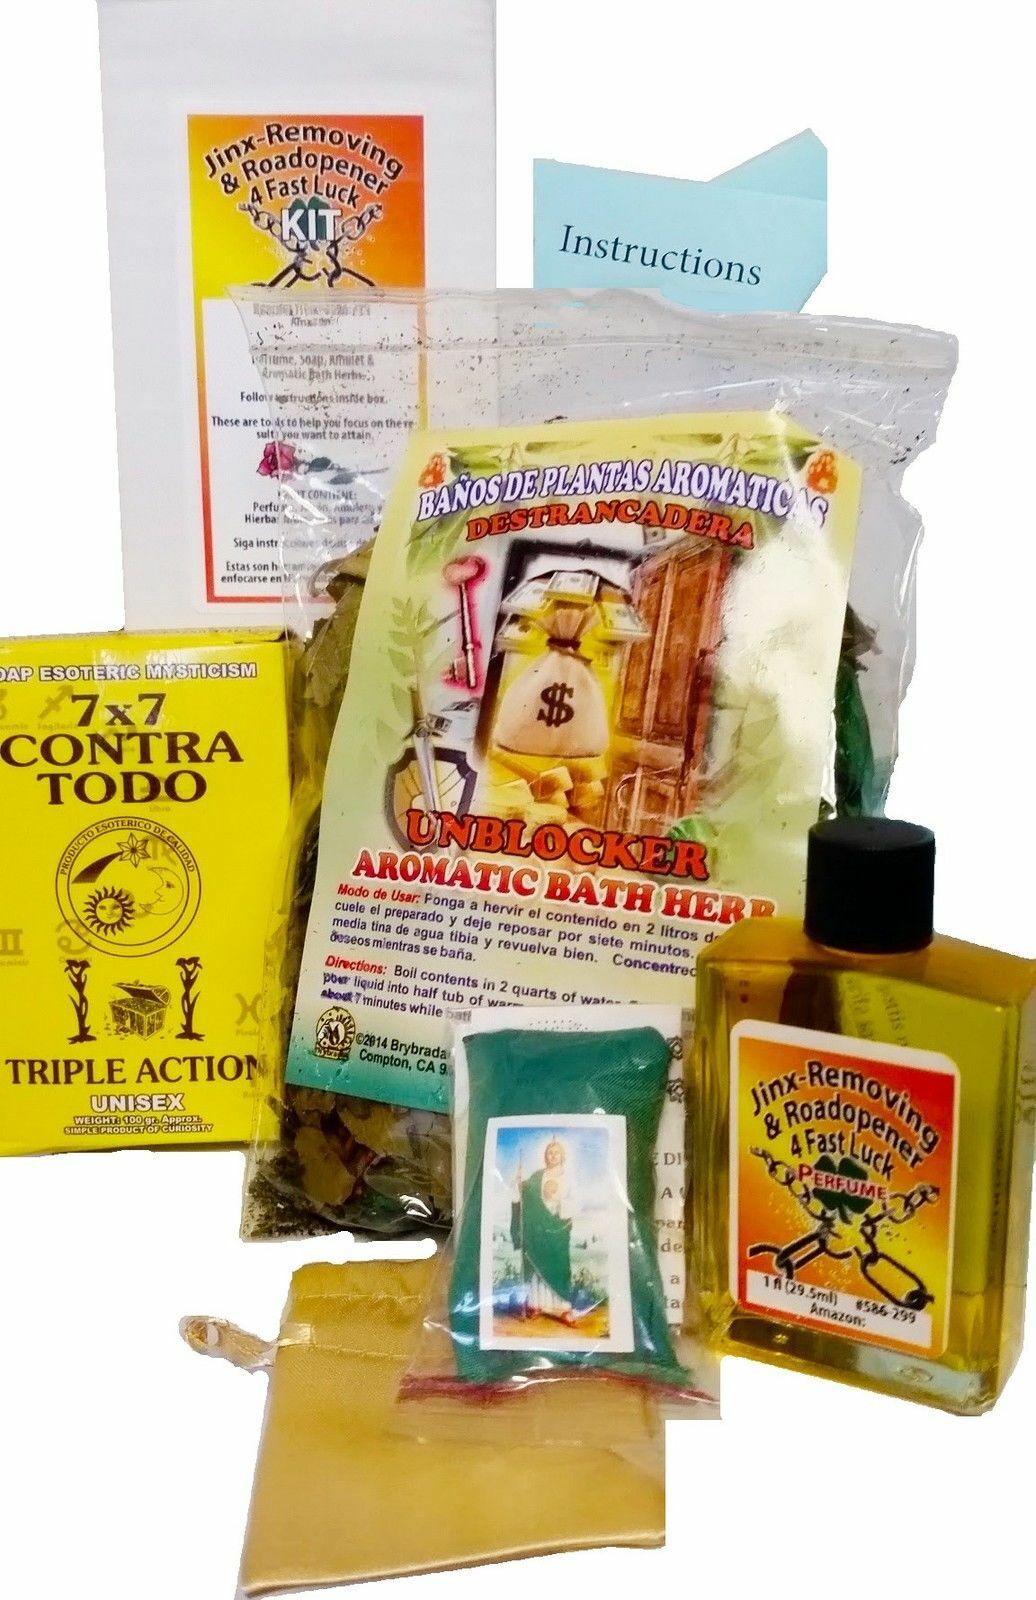 Jinx_Removing & Road Opener For Fast Luck Bath Kit with Perfume and Amulet